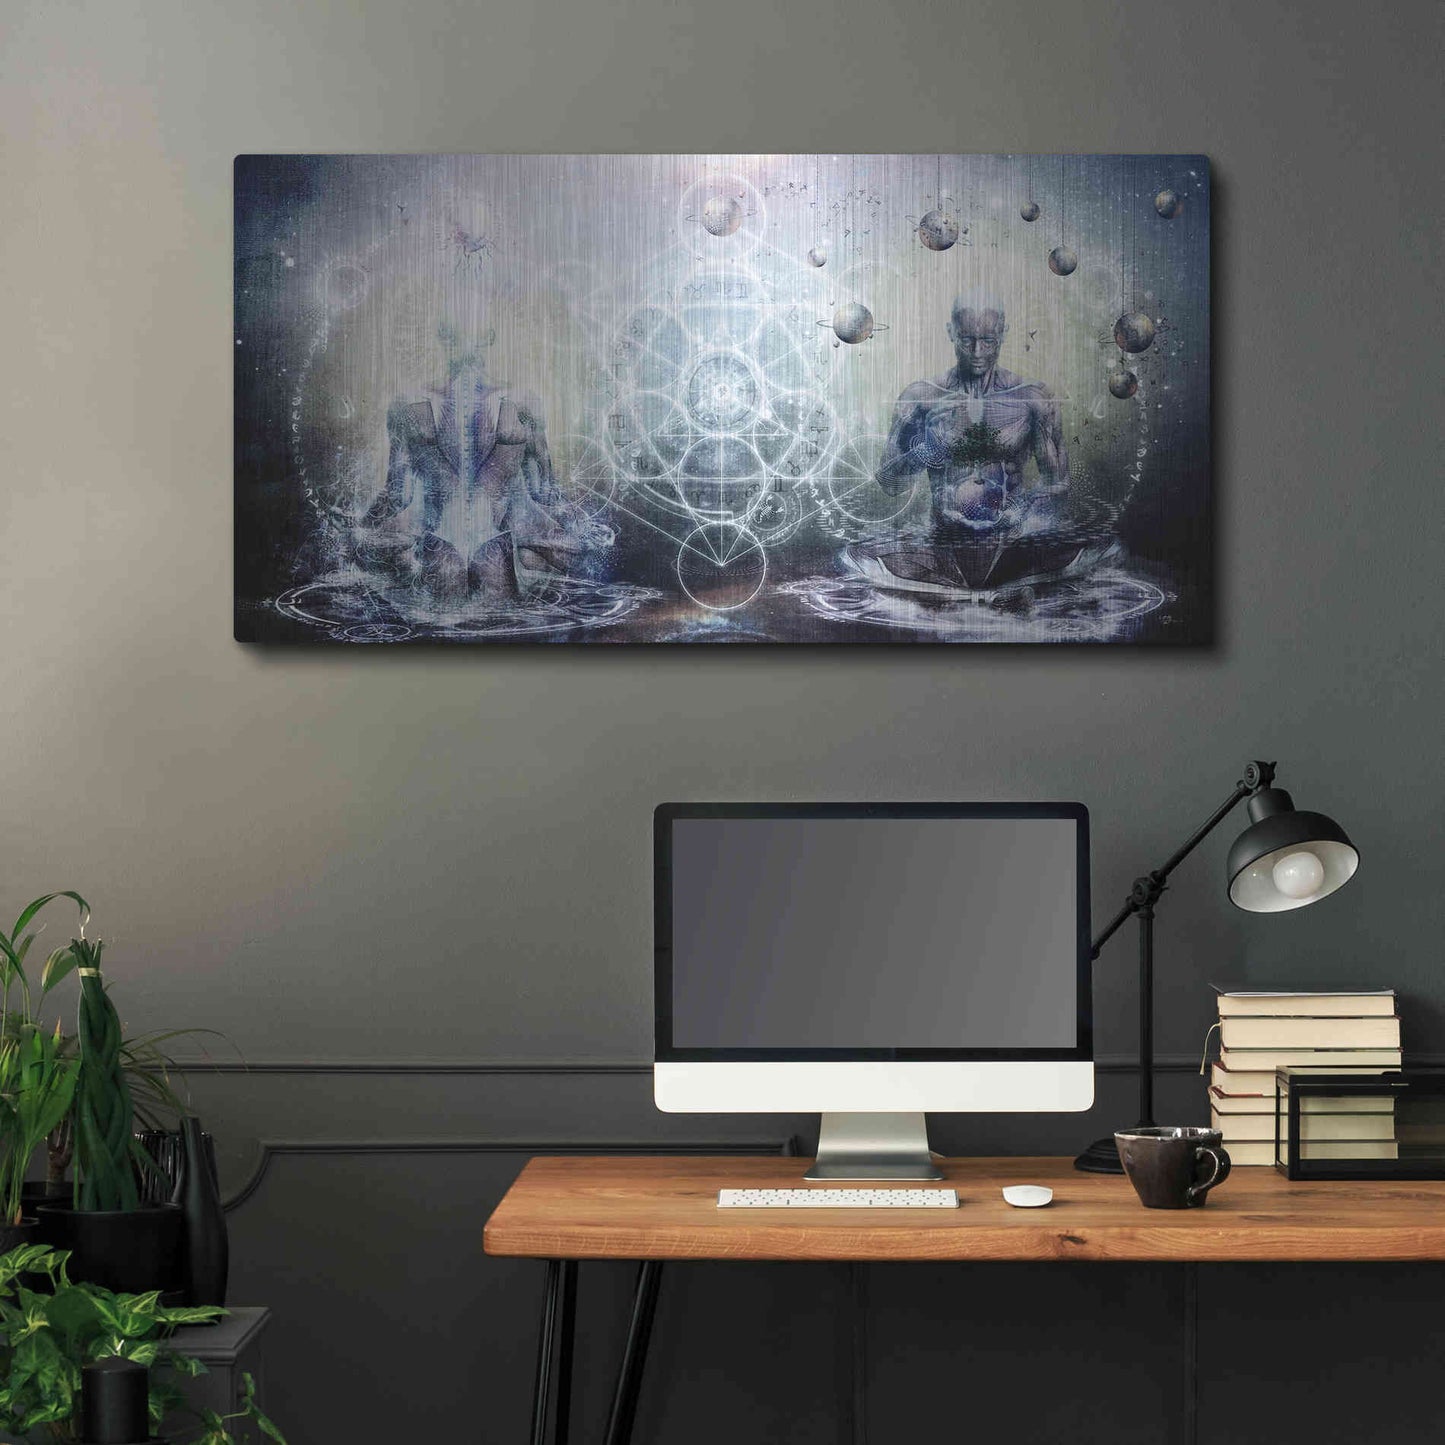 Luxe Metal Art 'Experience So Lucid, Discovery So Clear' by Cameron Gray, Metal Wall Art,48x24